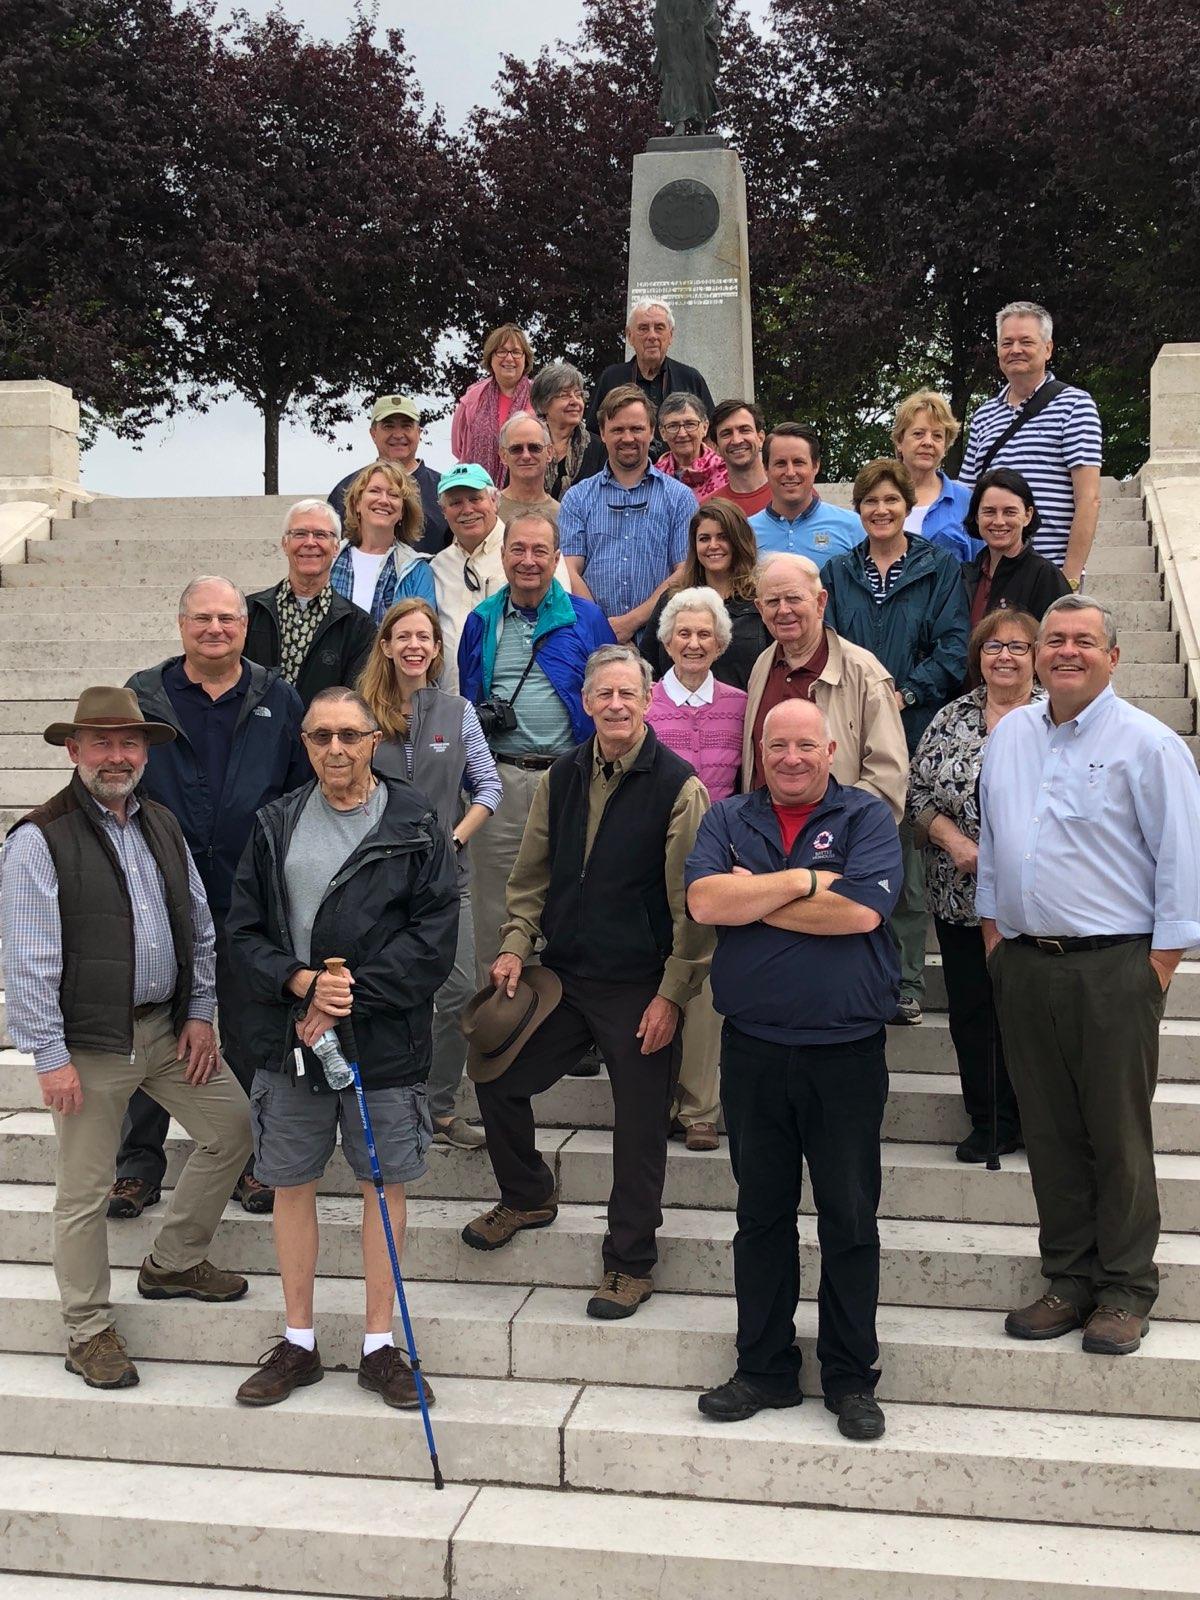 The tour group posing on the steps leading up to the Missouri monument.